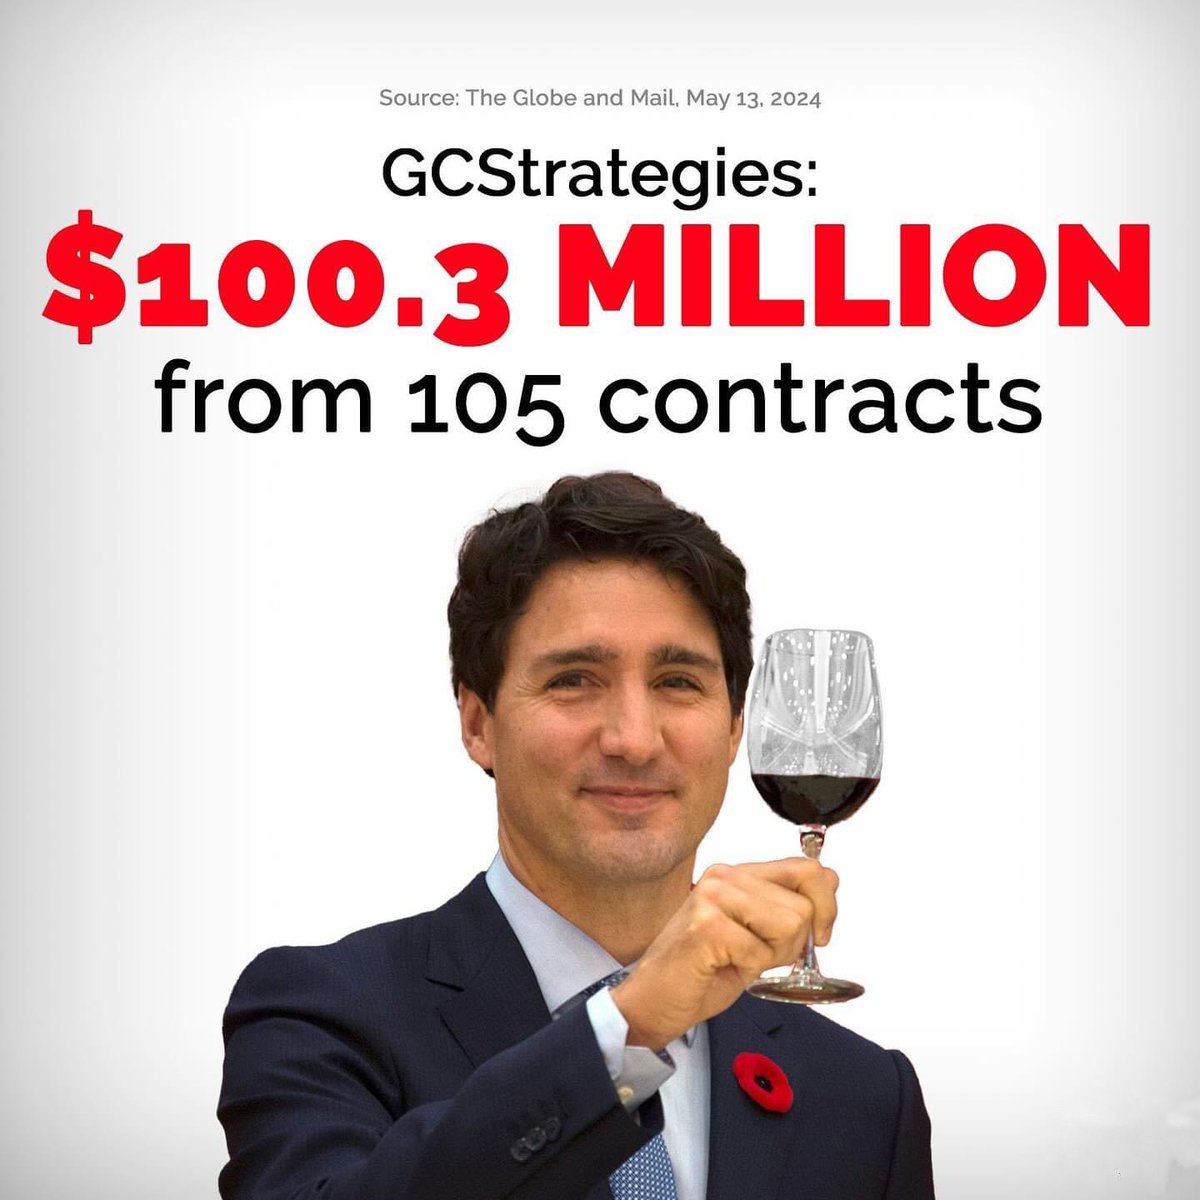 Trudeau’s billion dollar bonanza favoured ArriveScam contractors… while he lines the pockets of insiders, Canadians struggle to pay bills and put food on the table.